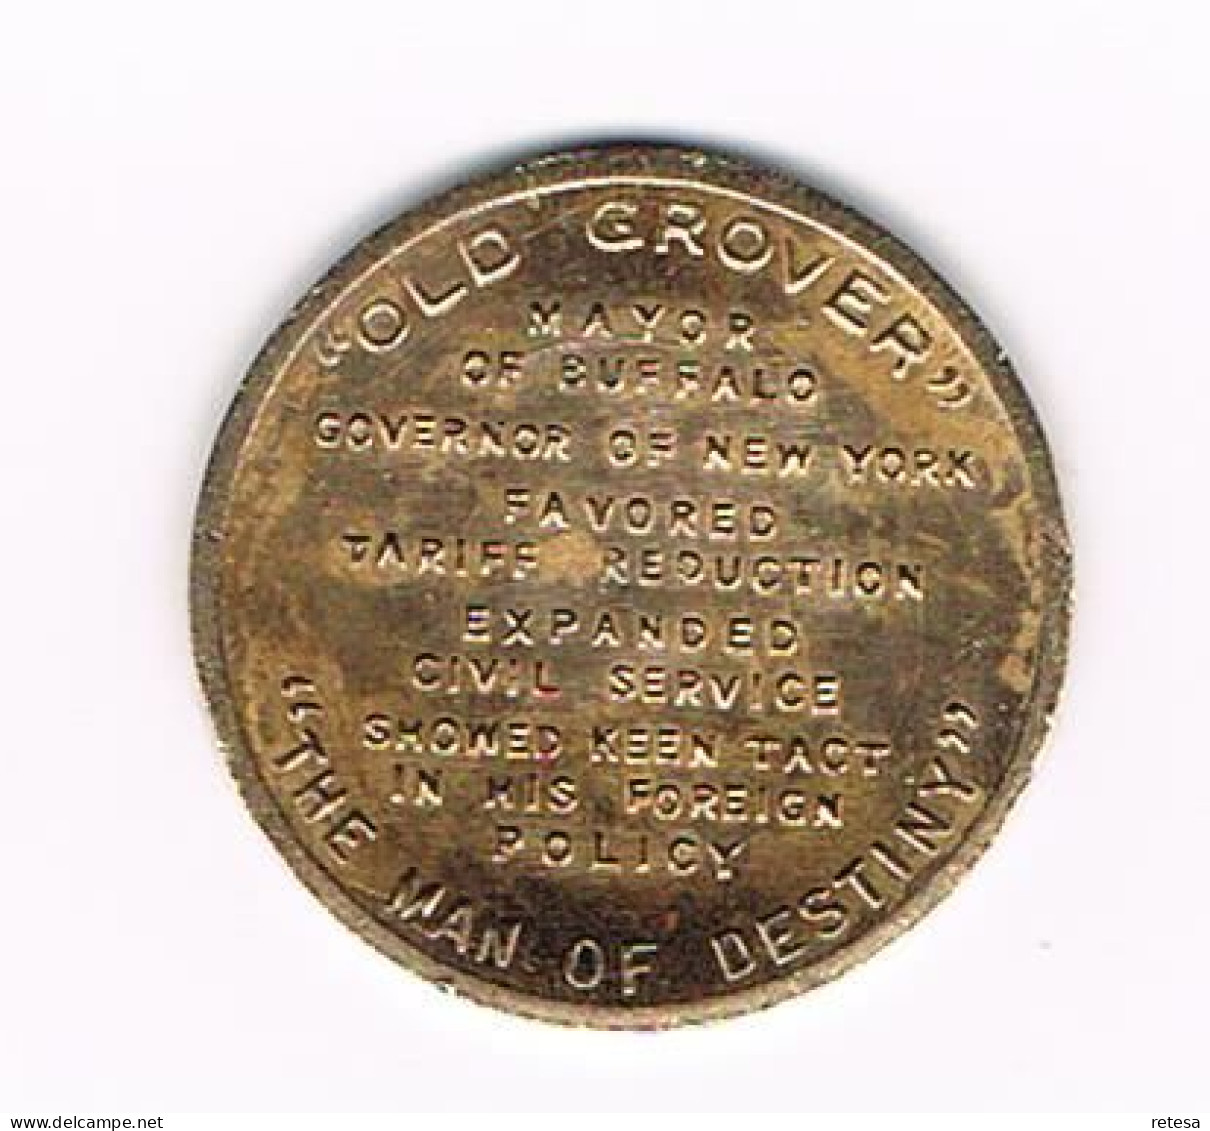 # PENNING  GROVER CLEVELAND 24 TH  PRESIDENT  U.S.A. - Souvenir-Medaille (elongated Coins)